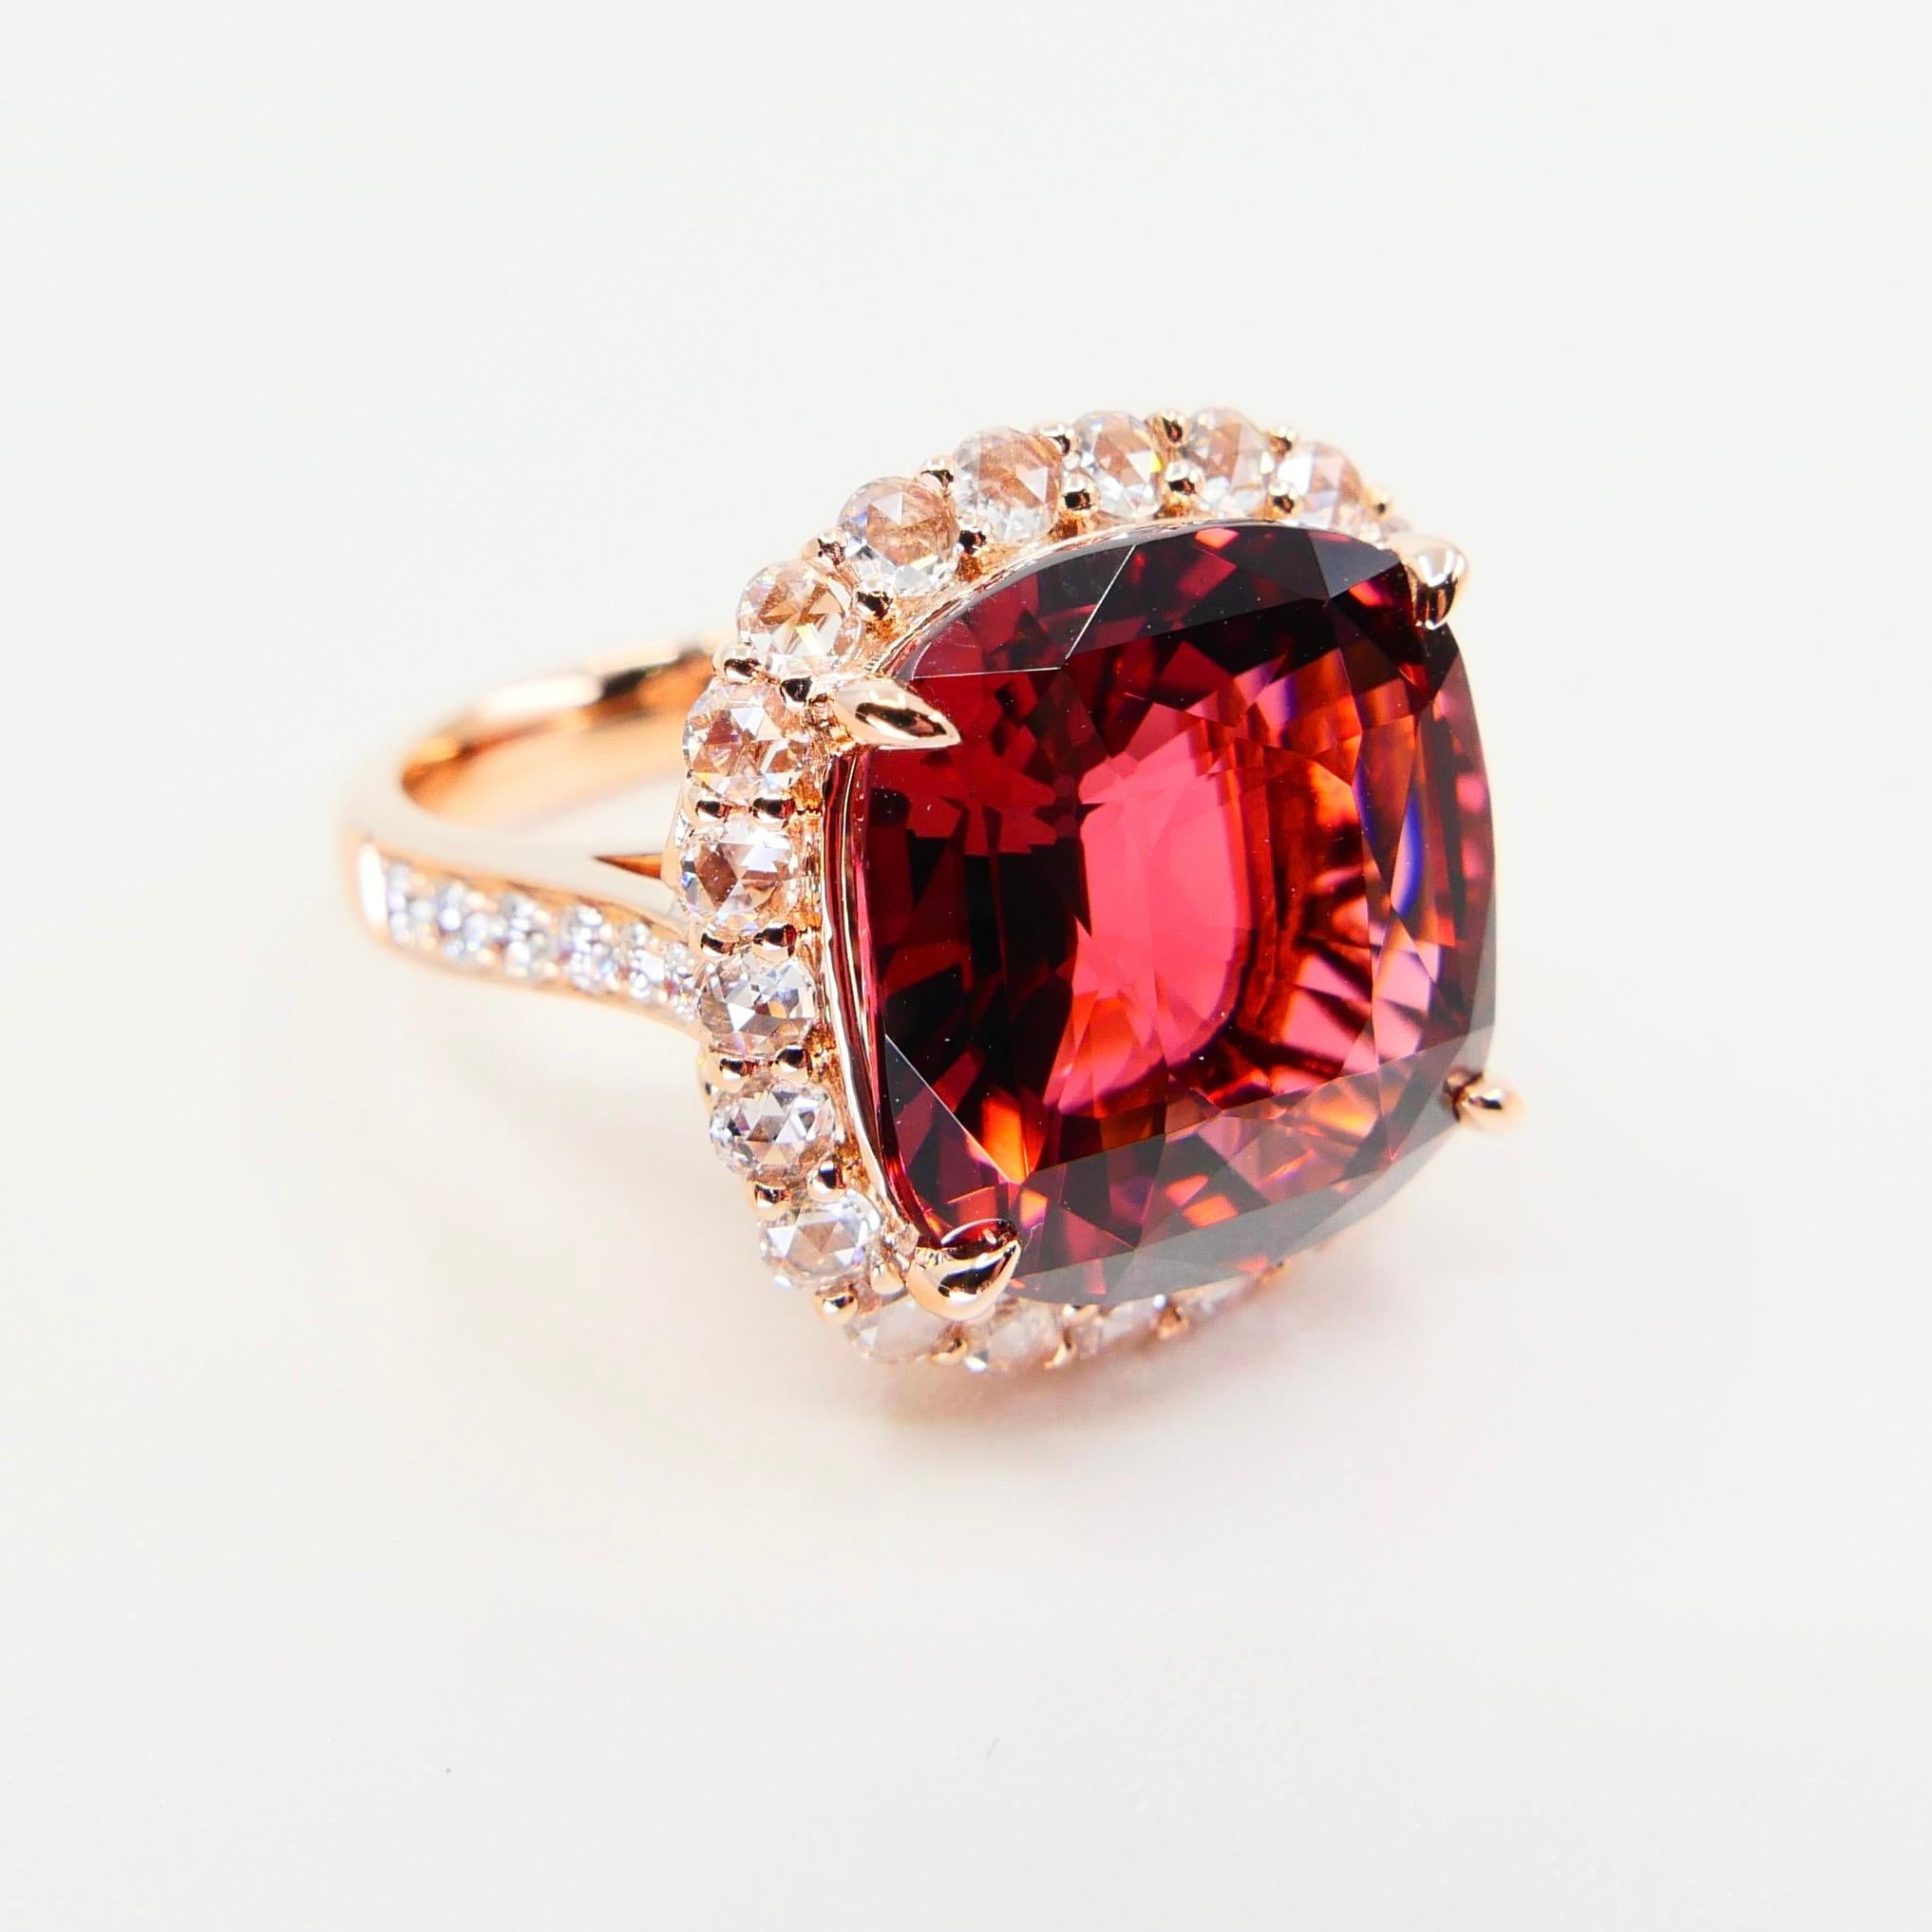 GIA Certified 11.55 Cts Orange Pink Tourmaline & Rose Cut Diamond Cocktail Ring For Sale 3